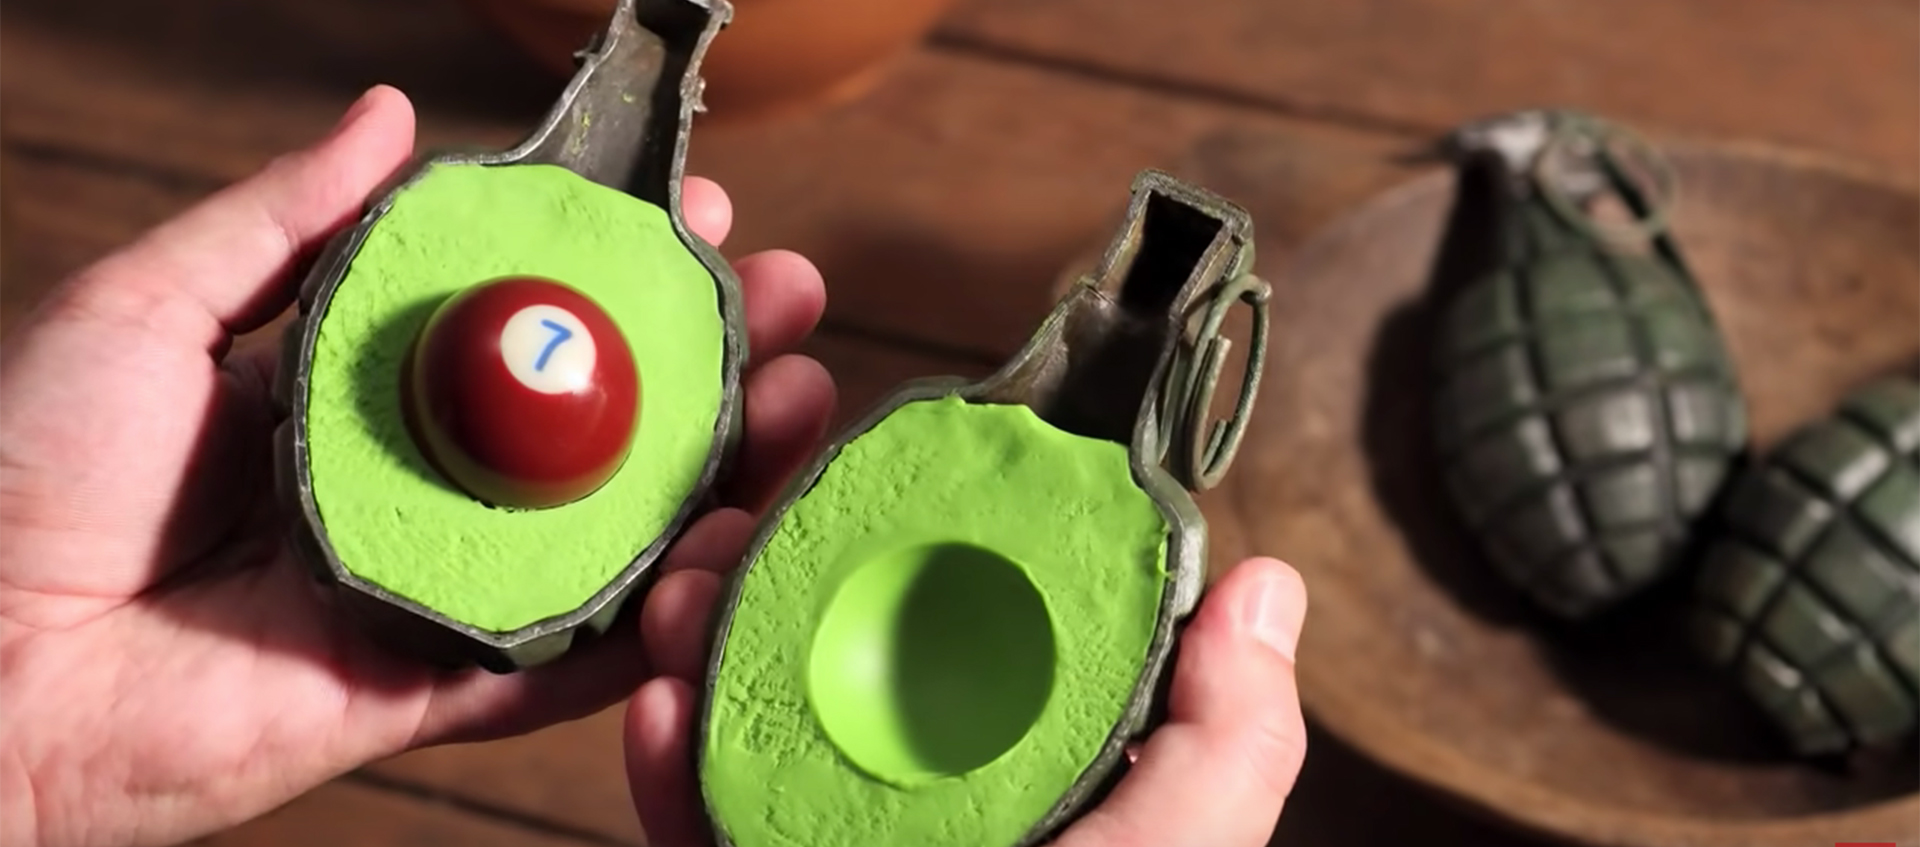 An image of a hand grenade cut in half, filled with green clay and a pool ball to mimic the appearance of a sliced avocado in the stop-motion animated short Fresh Guacamole by PES